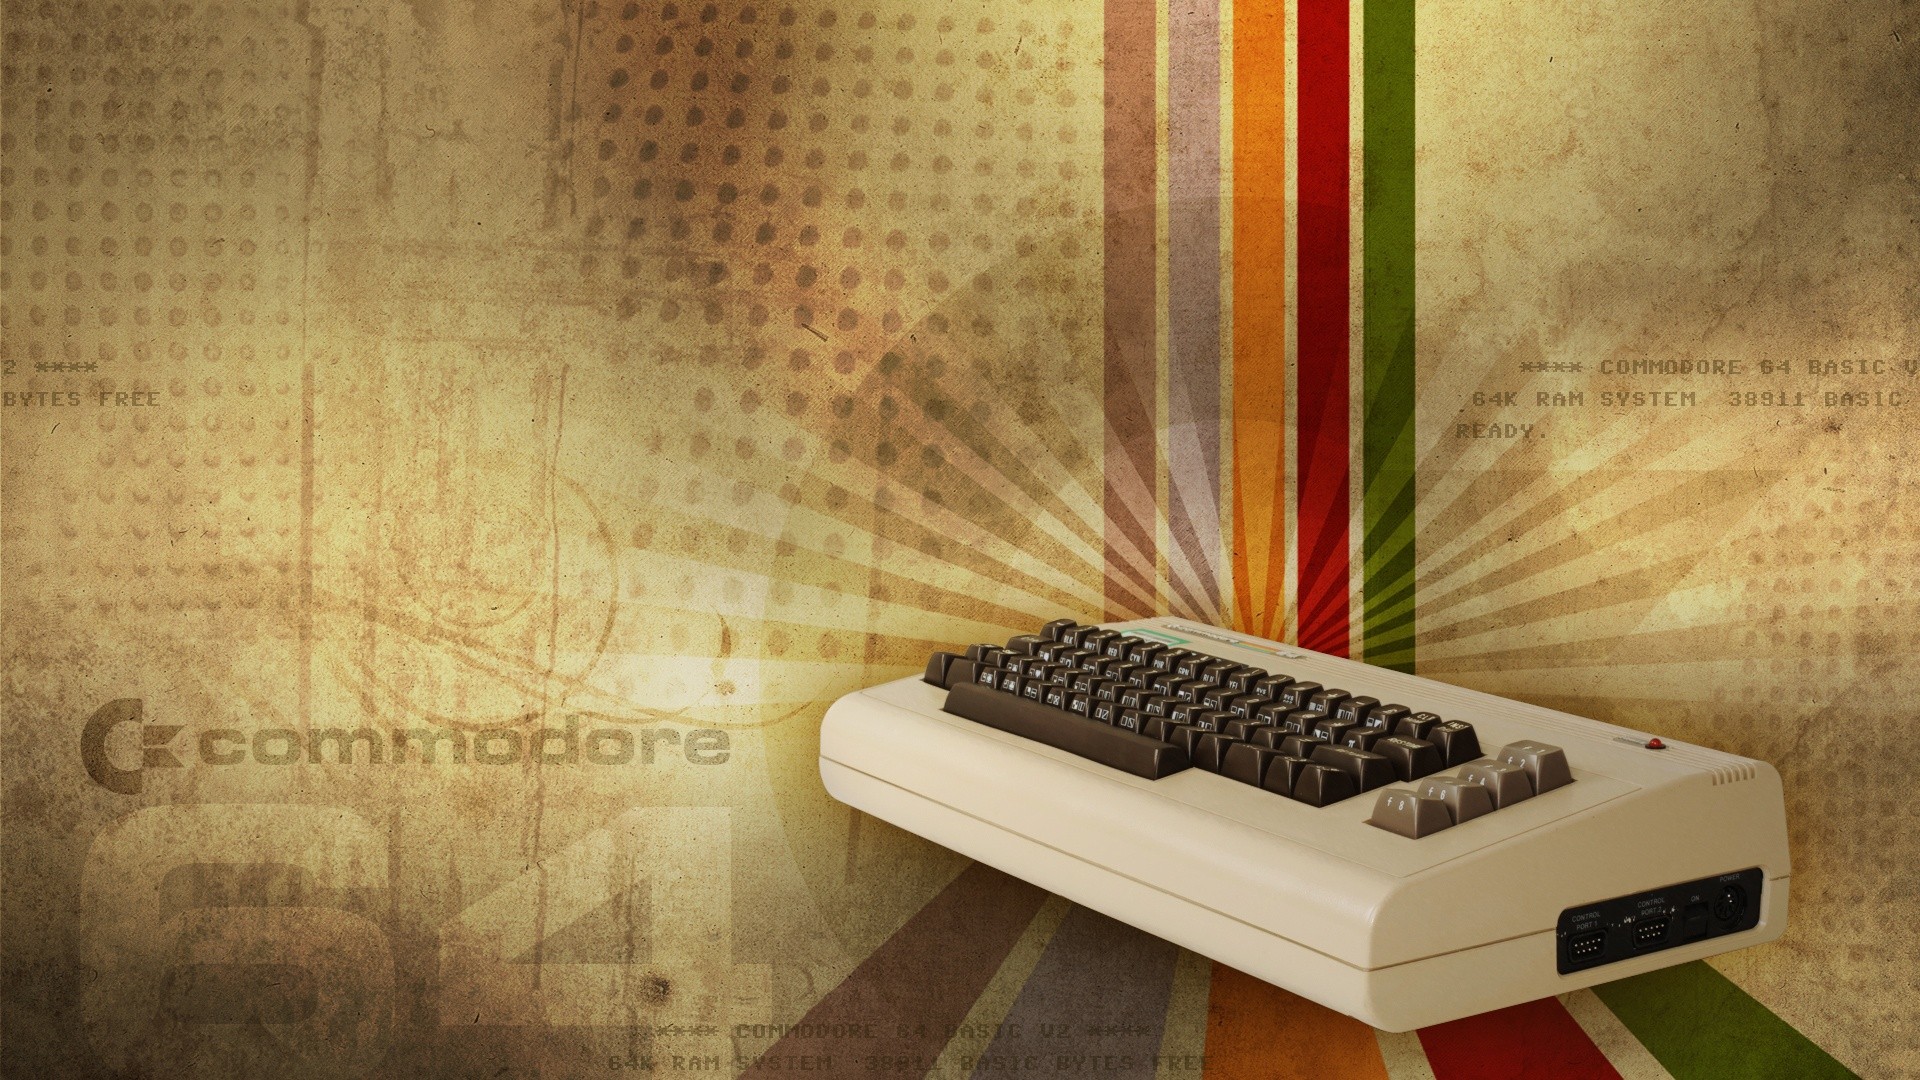  retro Games Commodore 64 Keyboards Vintage Consoles Wallpapers HD 